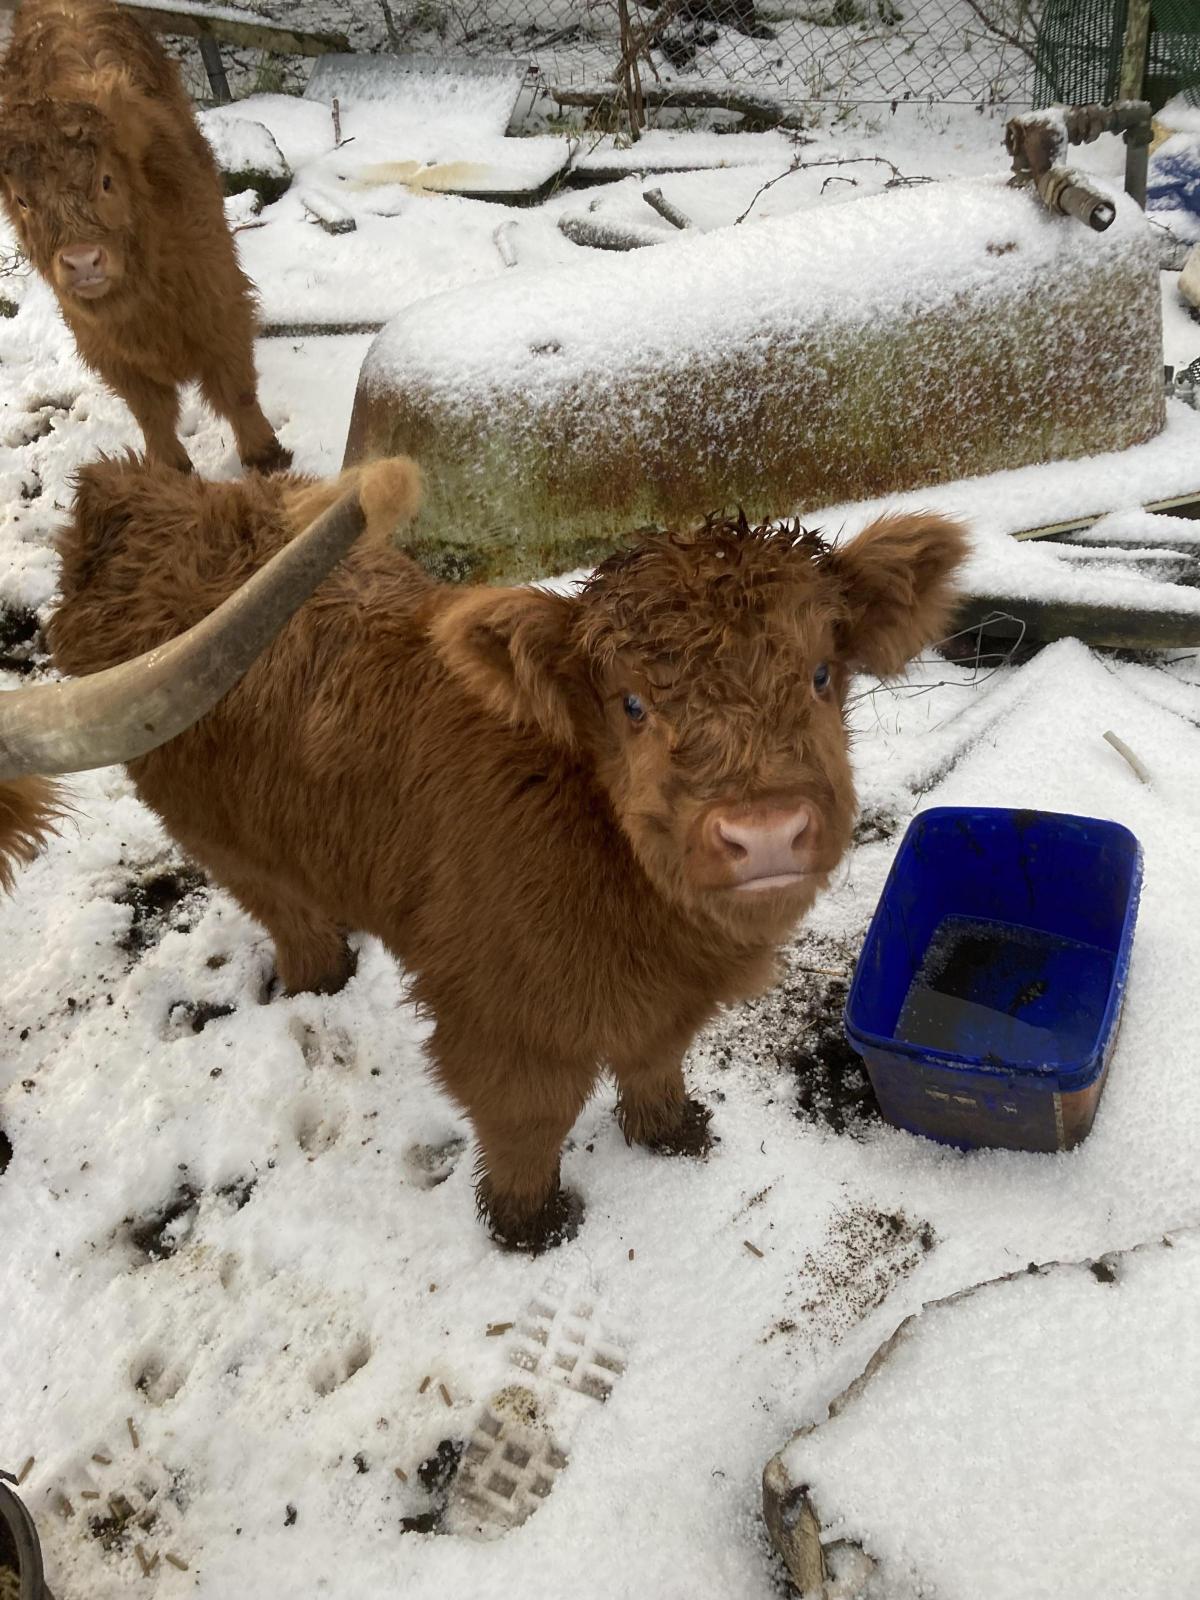 Anthony Robson - We don’t mind snow in the Hebrides, Holly & Ivy, Highland calves at Holm, Isle of Lewis